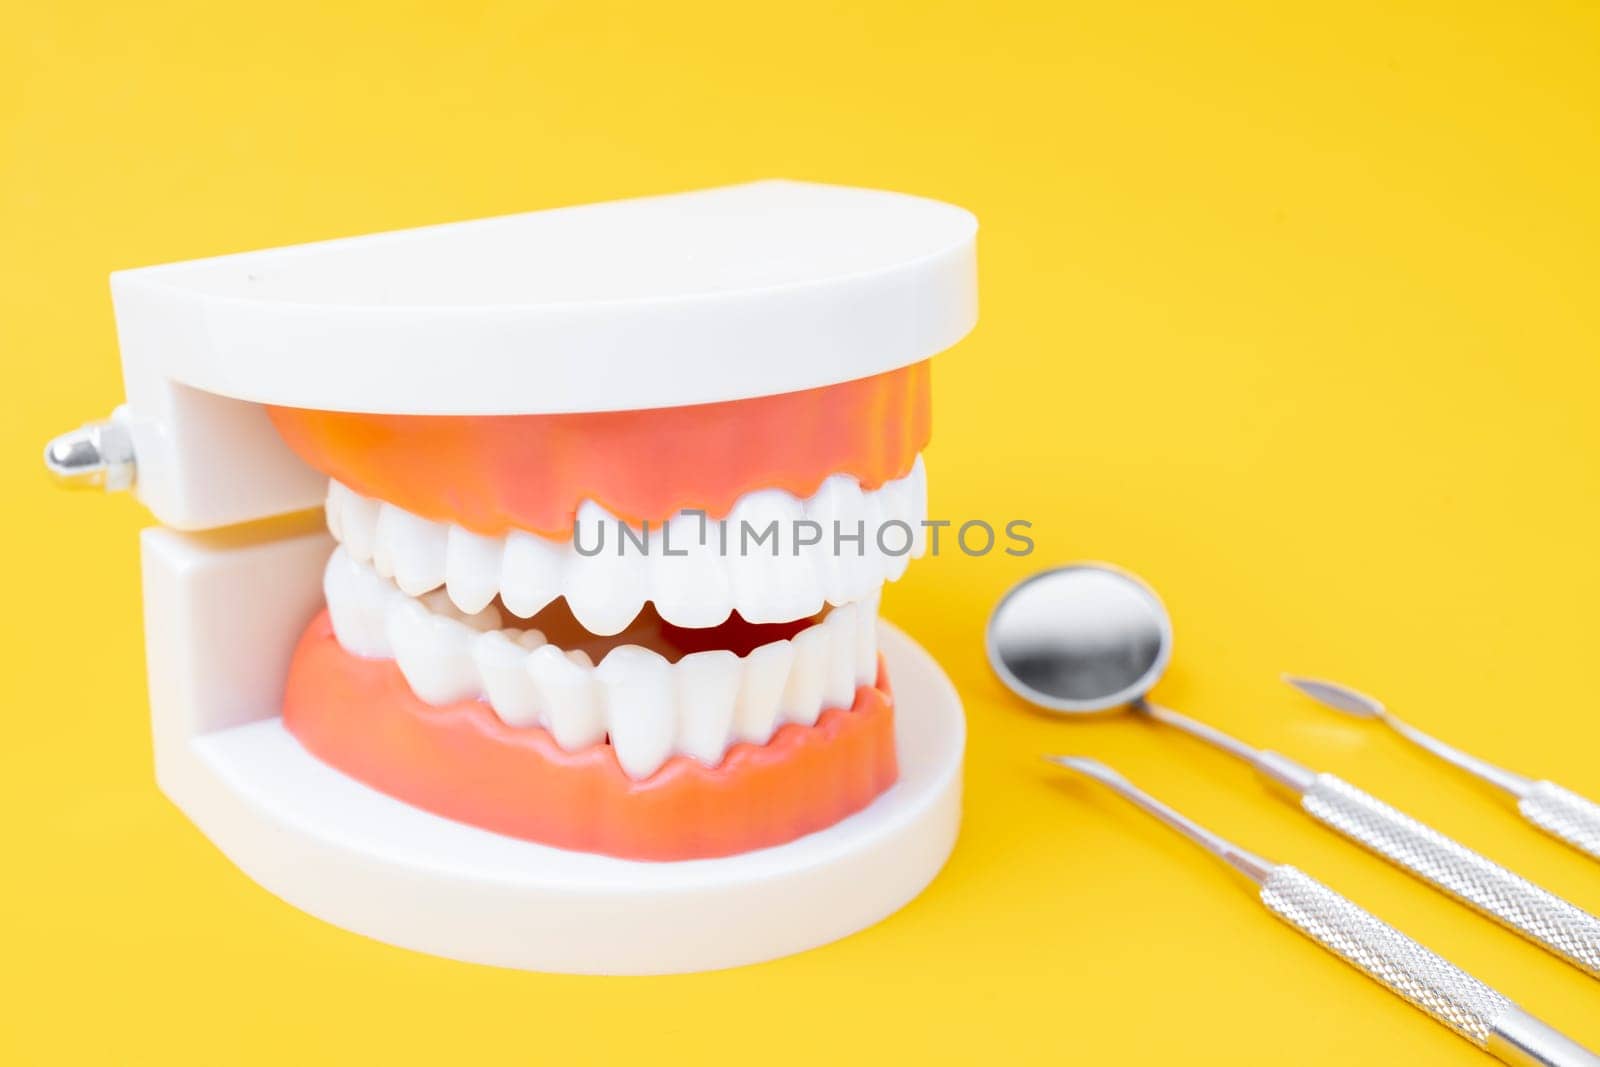 Dentures model and instrument dental on yellow background.